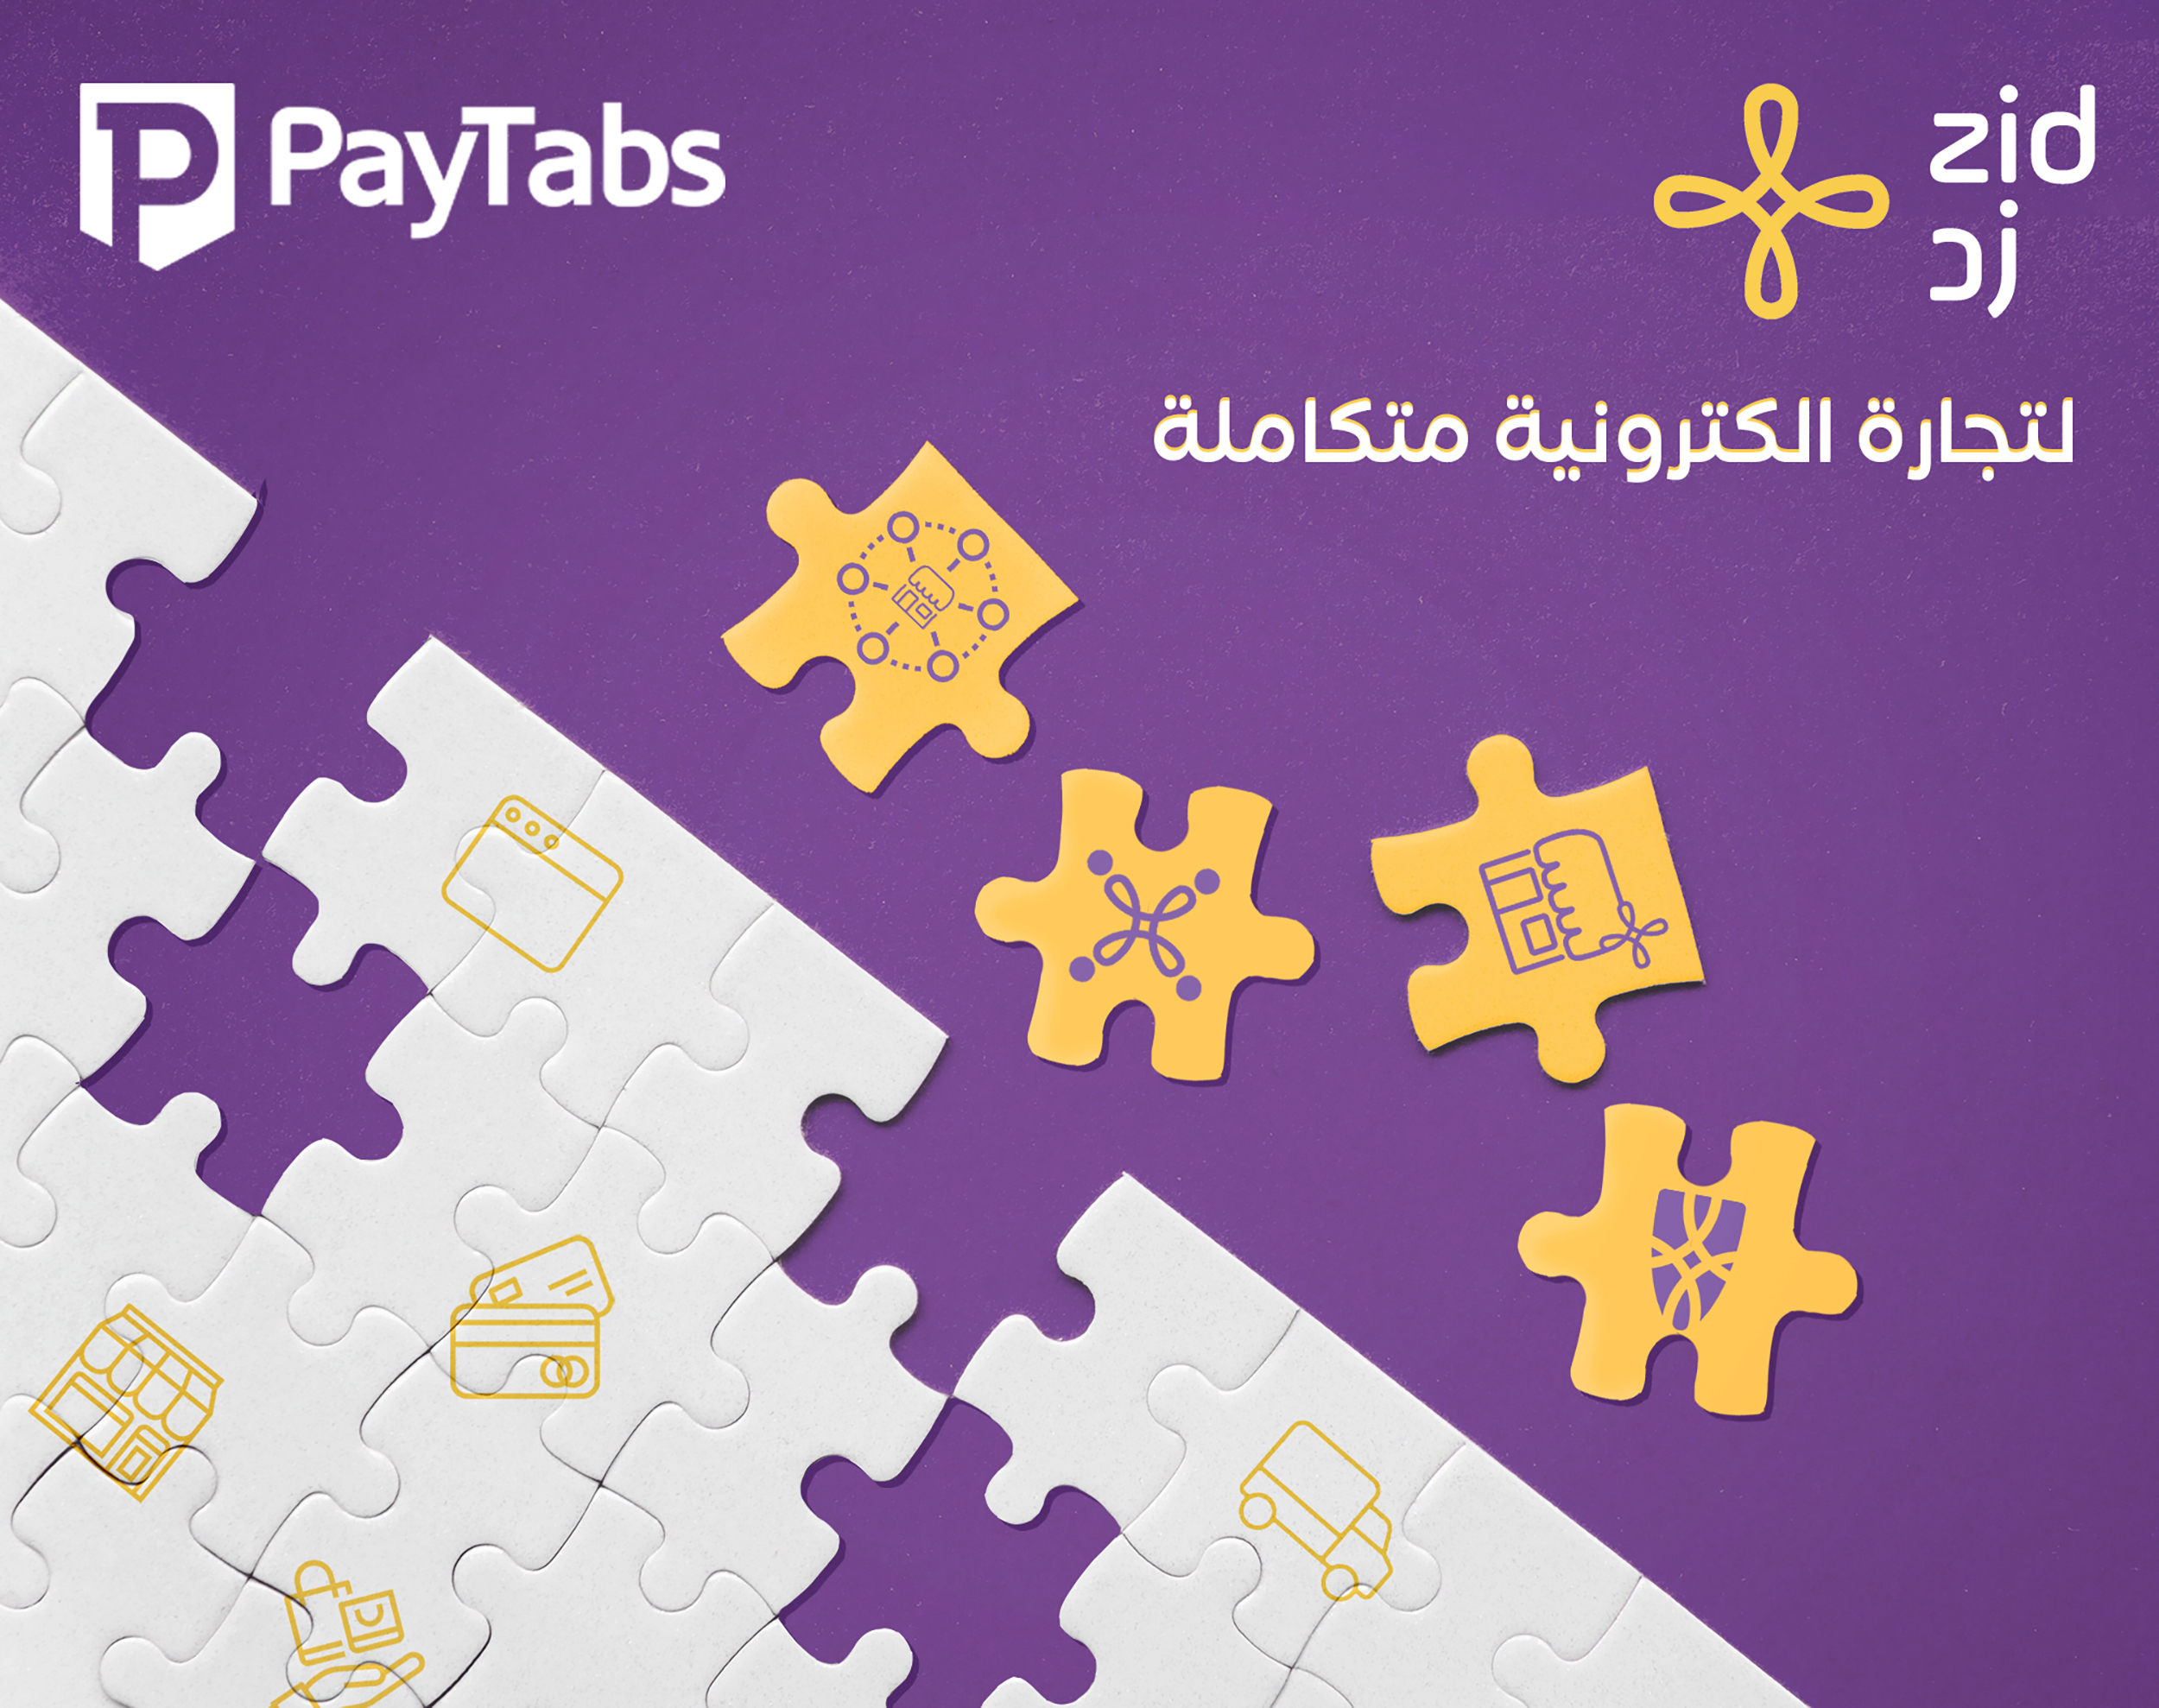 PayTabs-&-Zid-partner-for-integrated-e-commerce